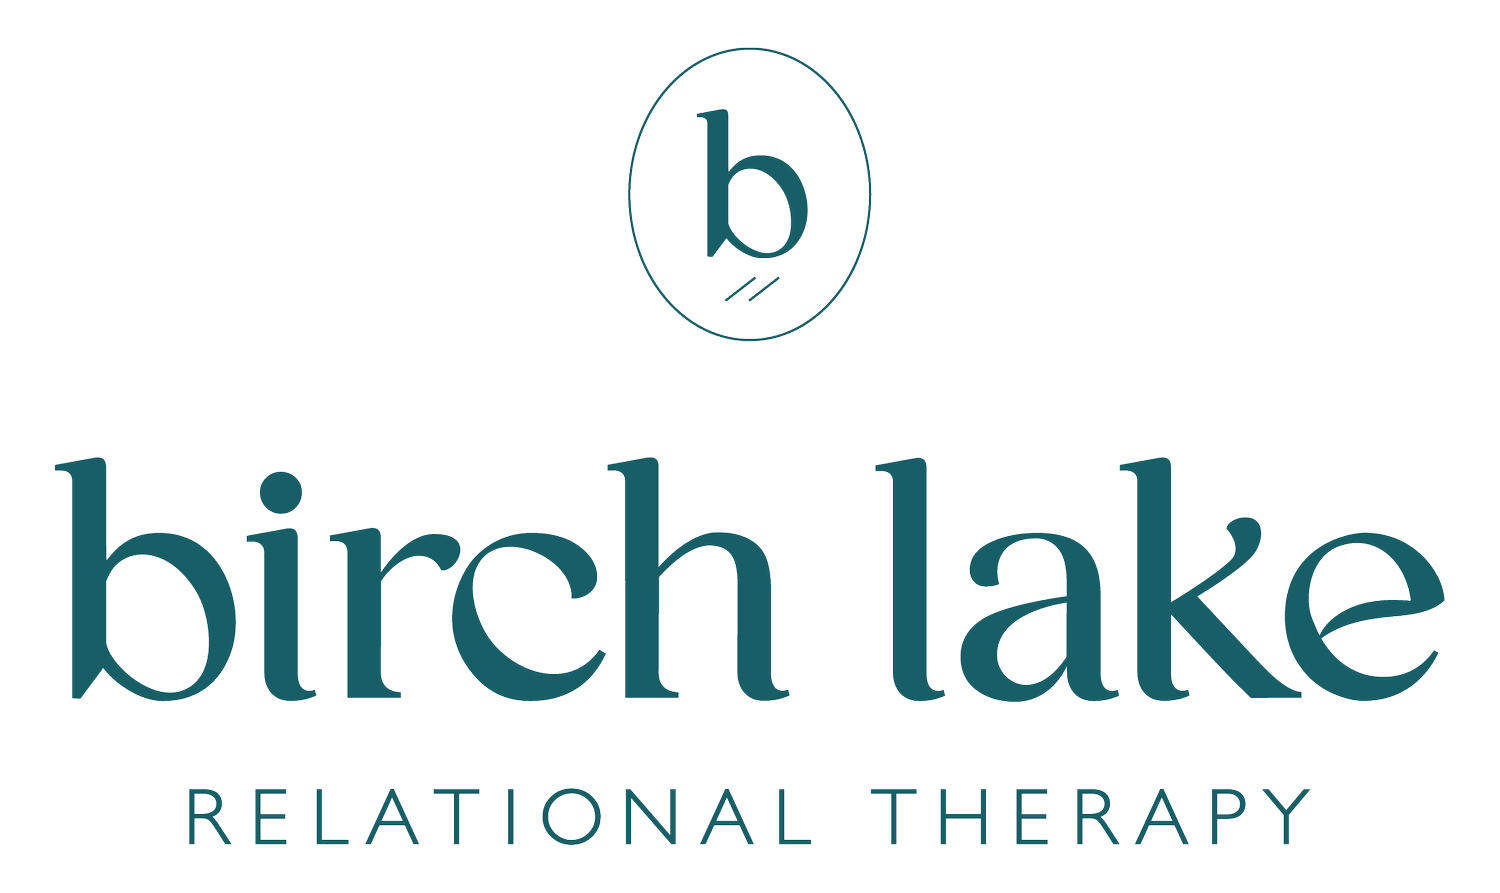 Birch Lake Relational Therapy - Individual, Relationship, and Sex Therapy